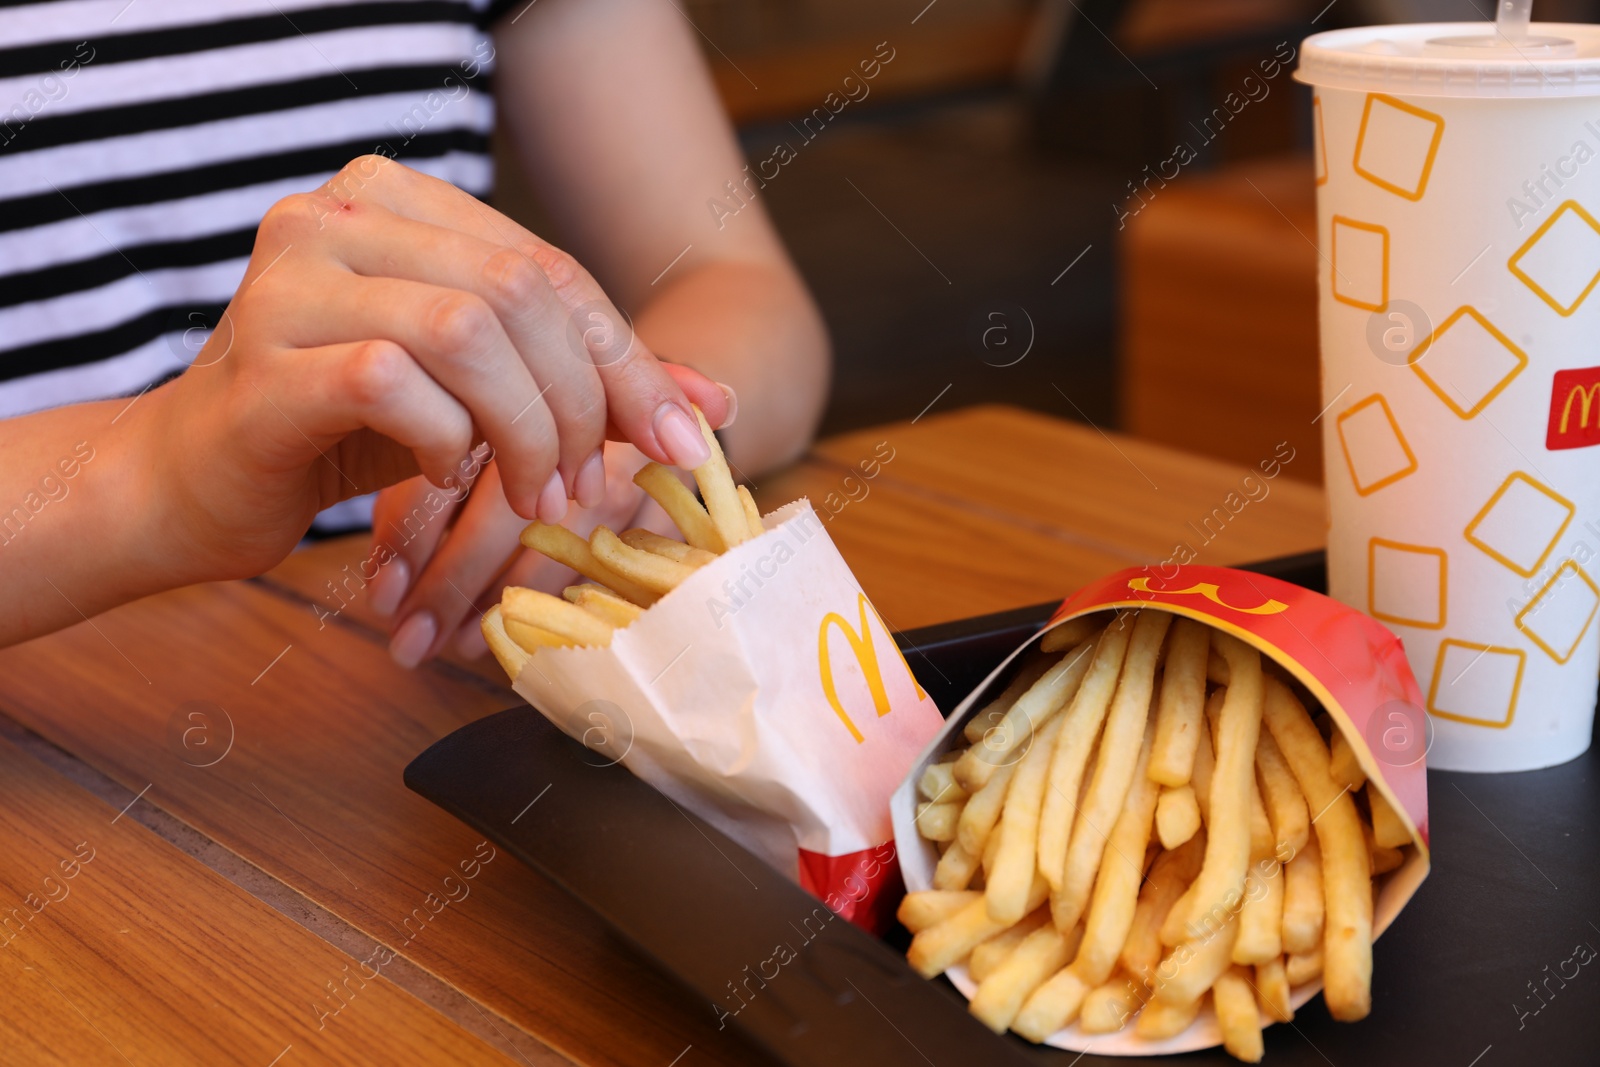 Photo of MYKOLAIV, UKRAINE - AUGUST 11, 2021: Woman with McDonald's French fries and drink at table in cafe, closeup